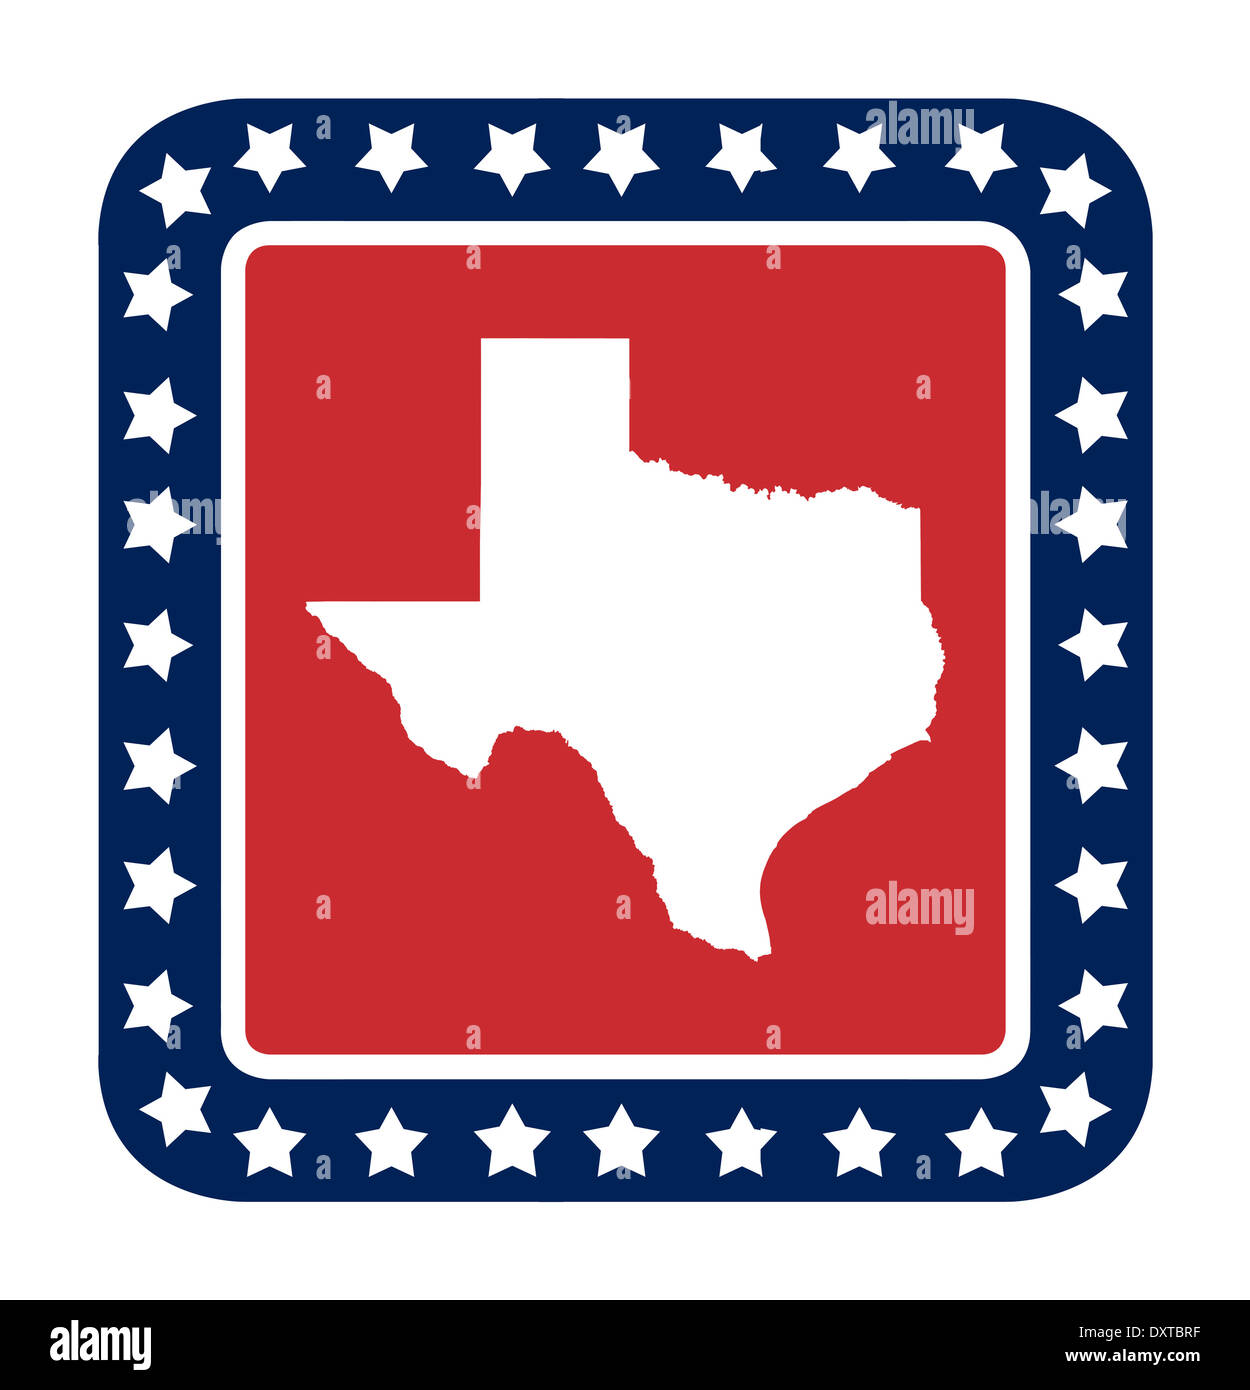 Texas state button on American flag in flat web design style, isolated on white background. Stock Photo